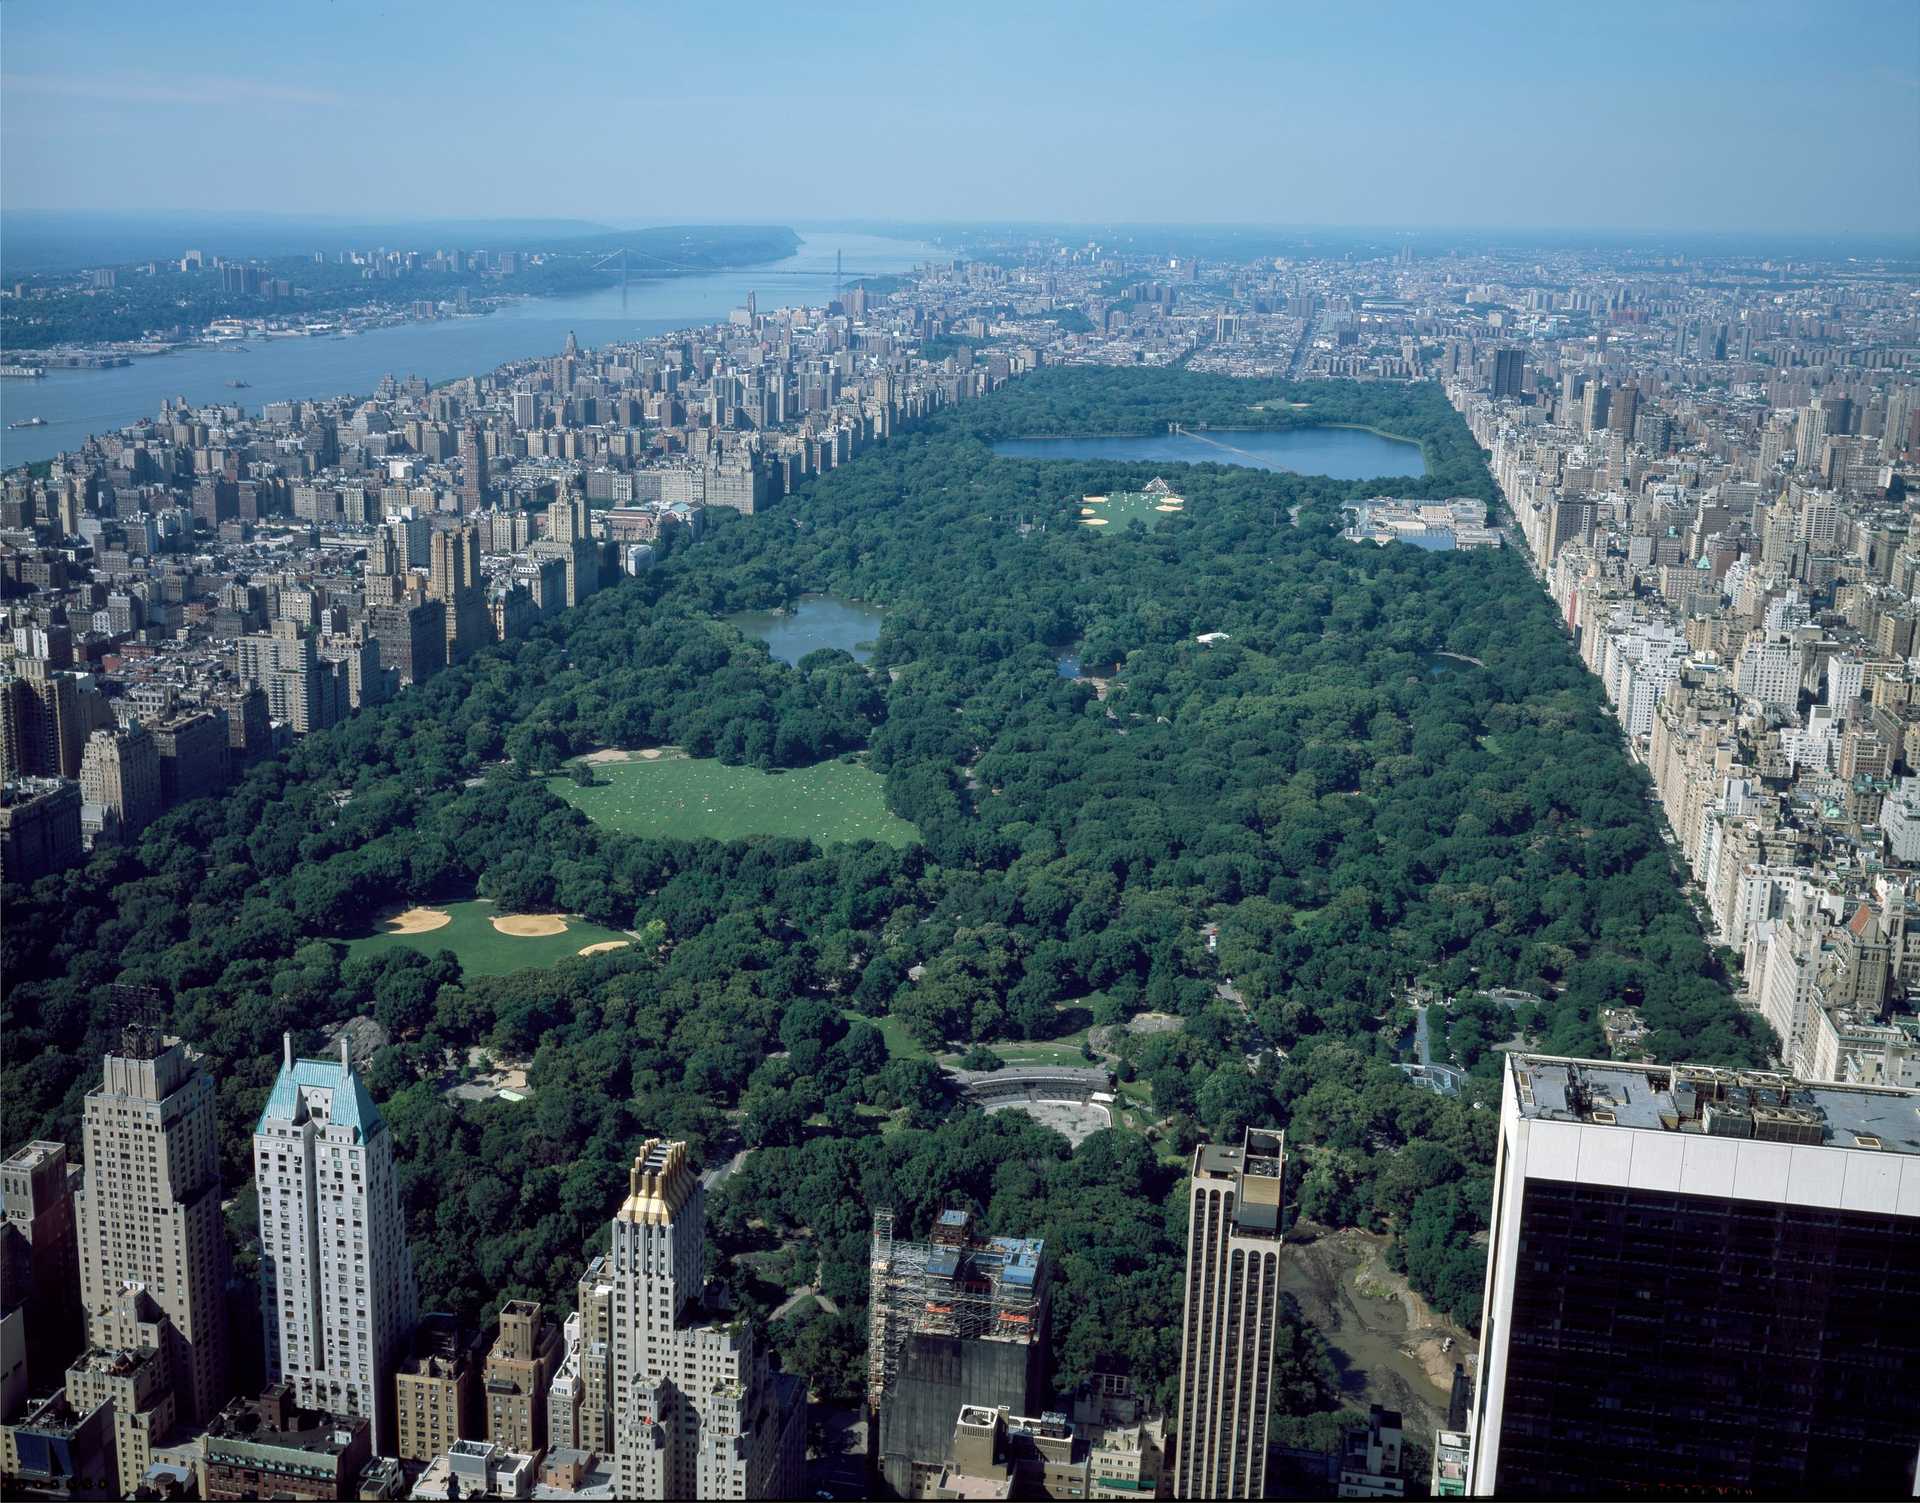 An aerial view of Central Park in New York City